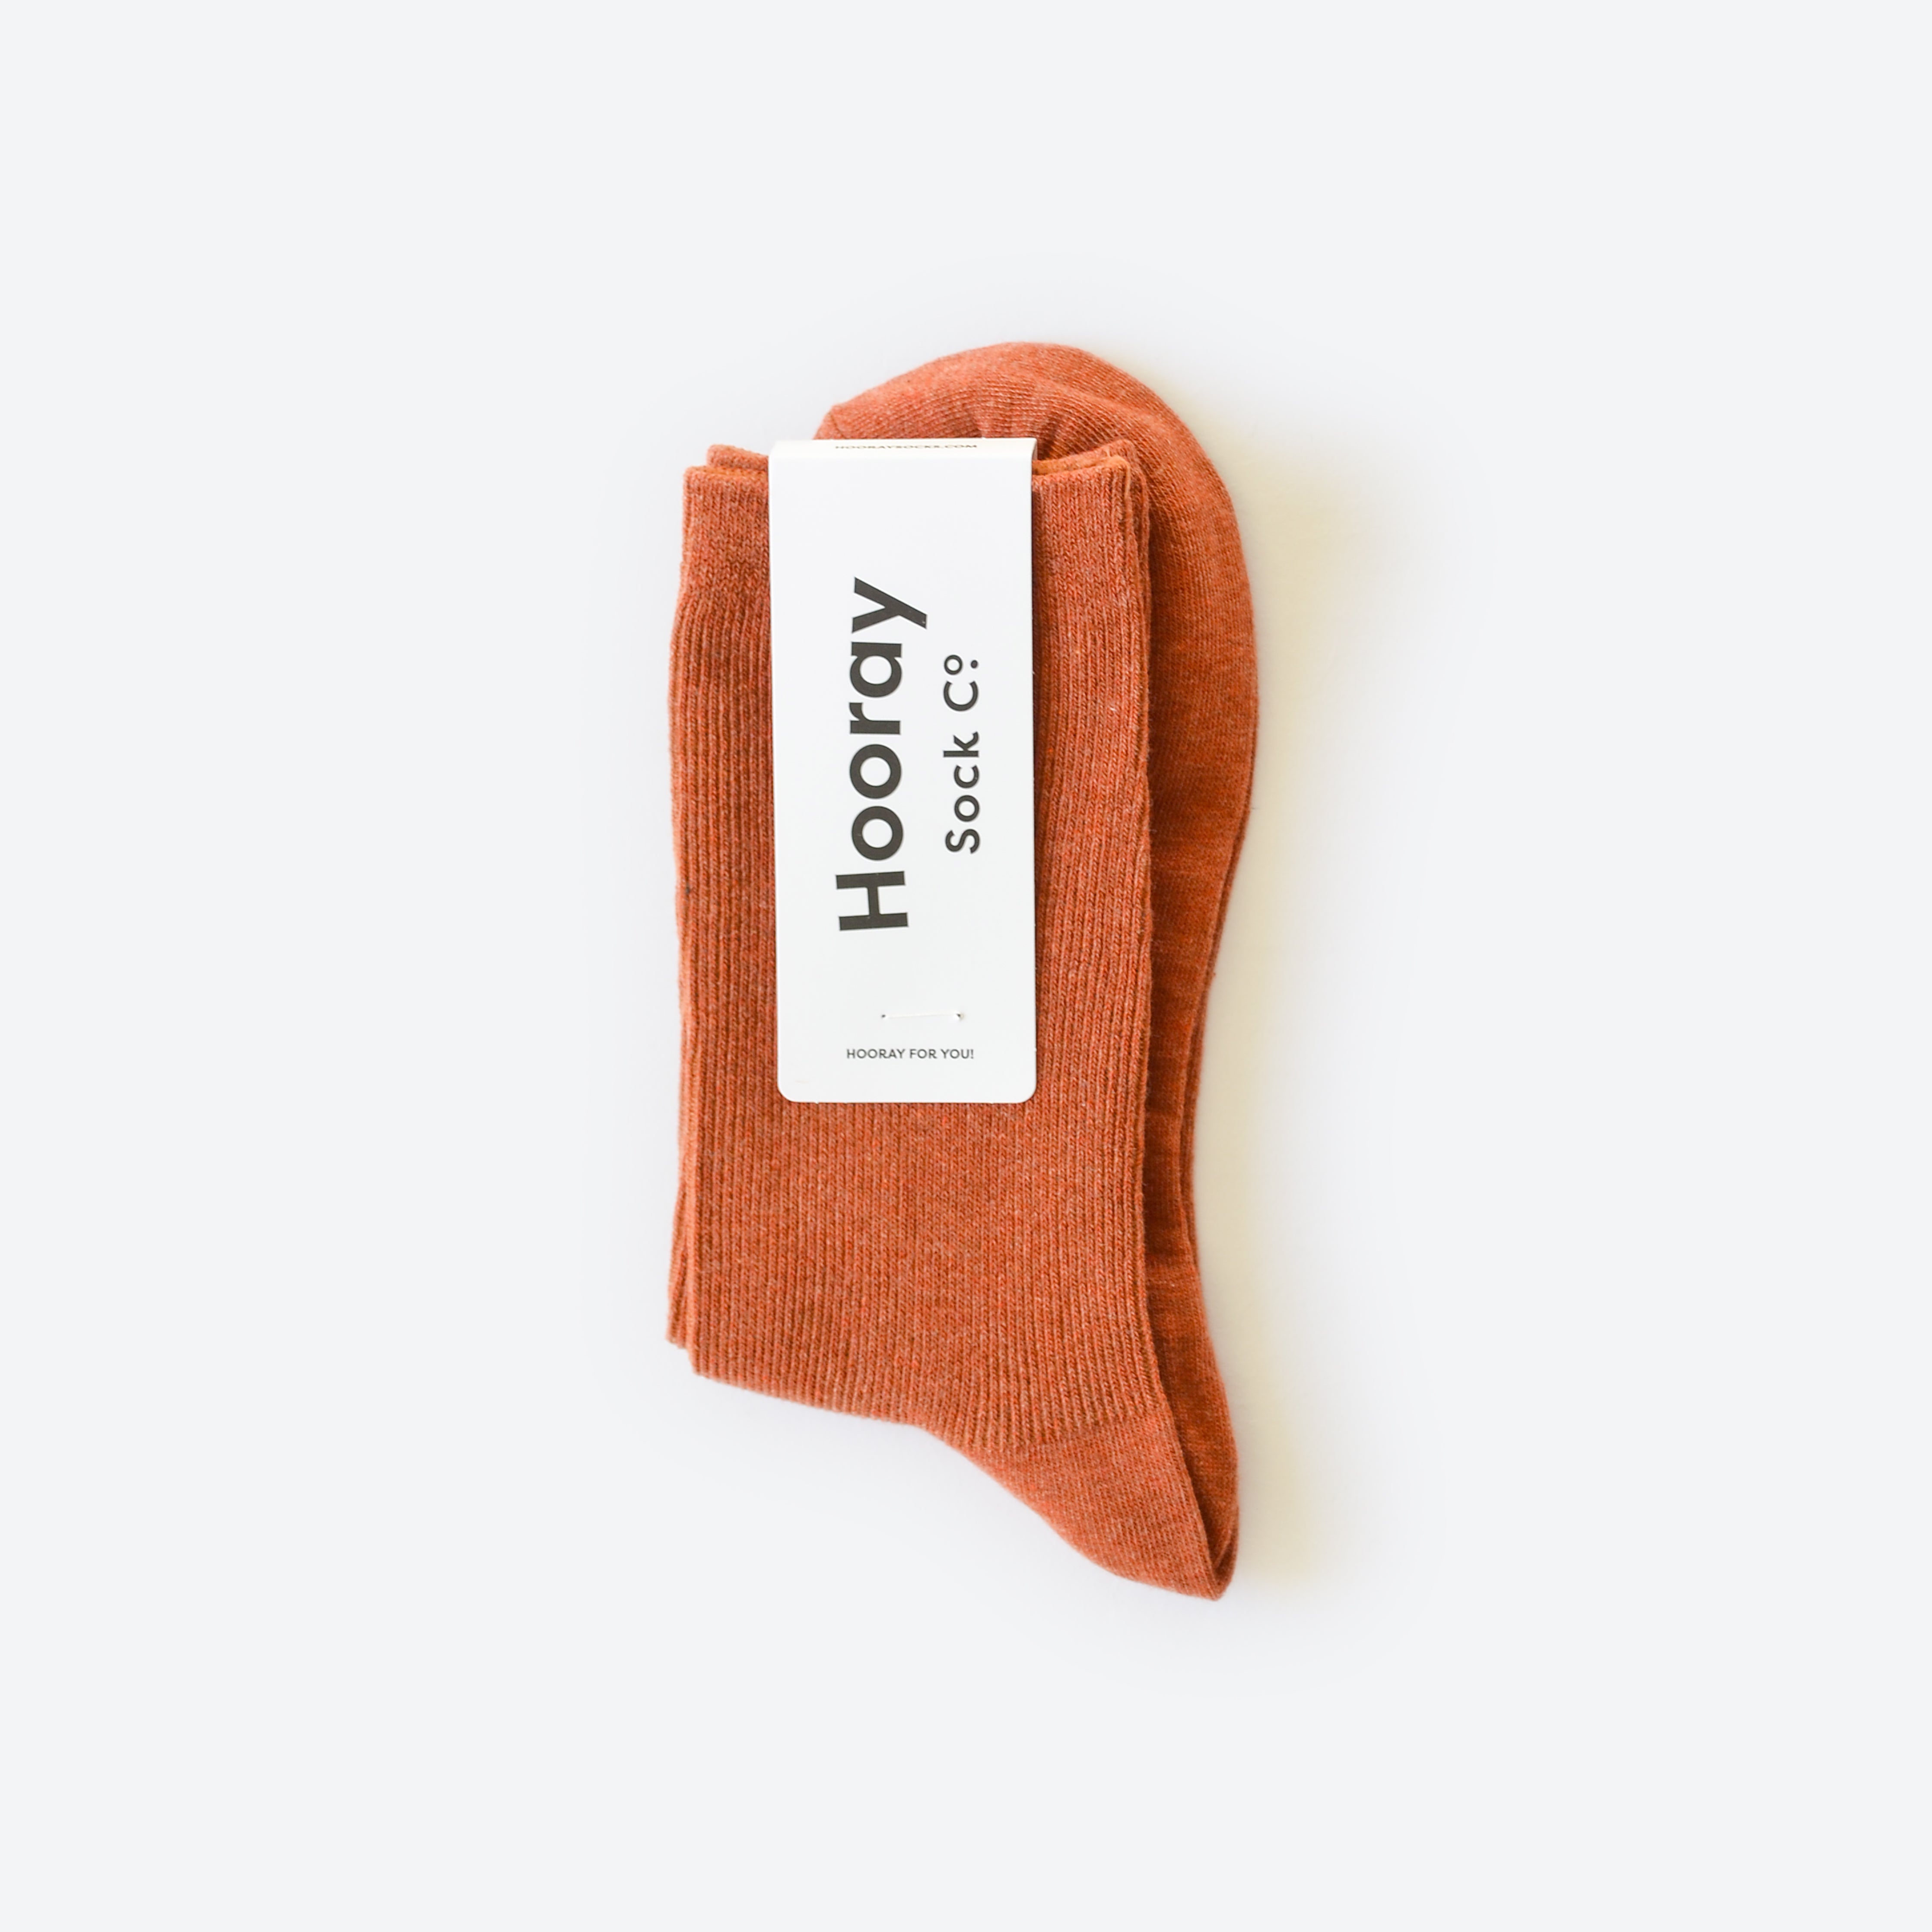 Hooray Sock Co.&#39;s Spice Crew Socks. Everyday comfort and style in Spice Brown. Unisex, shorter crew length. 80% cotton, 20% spandex. Size: Small (Women’s 4-10).